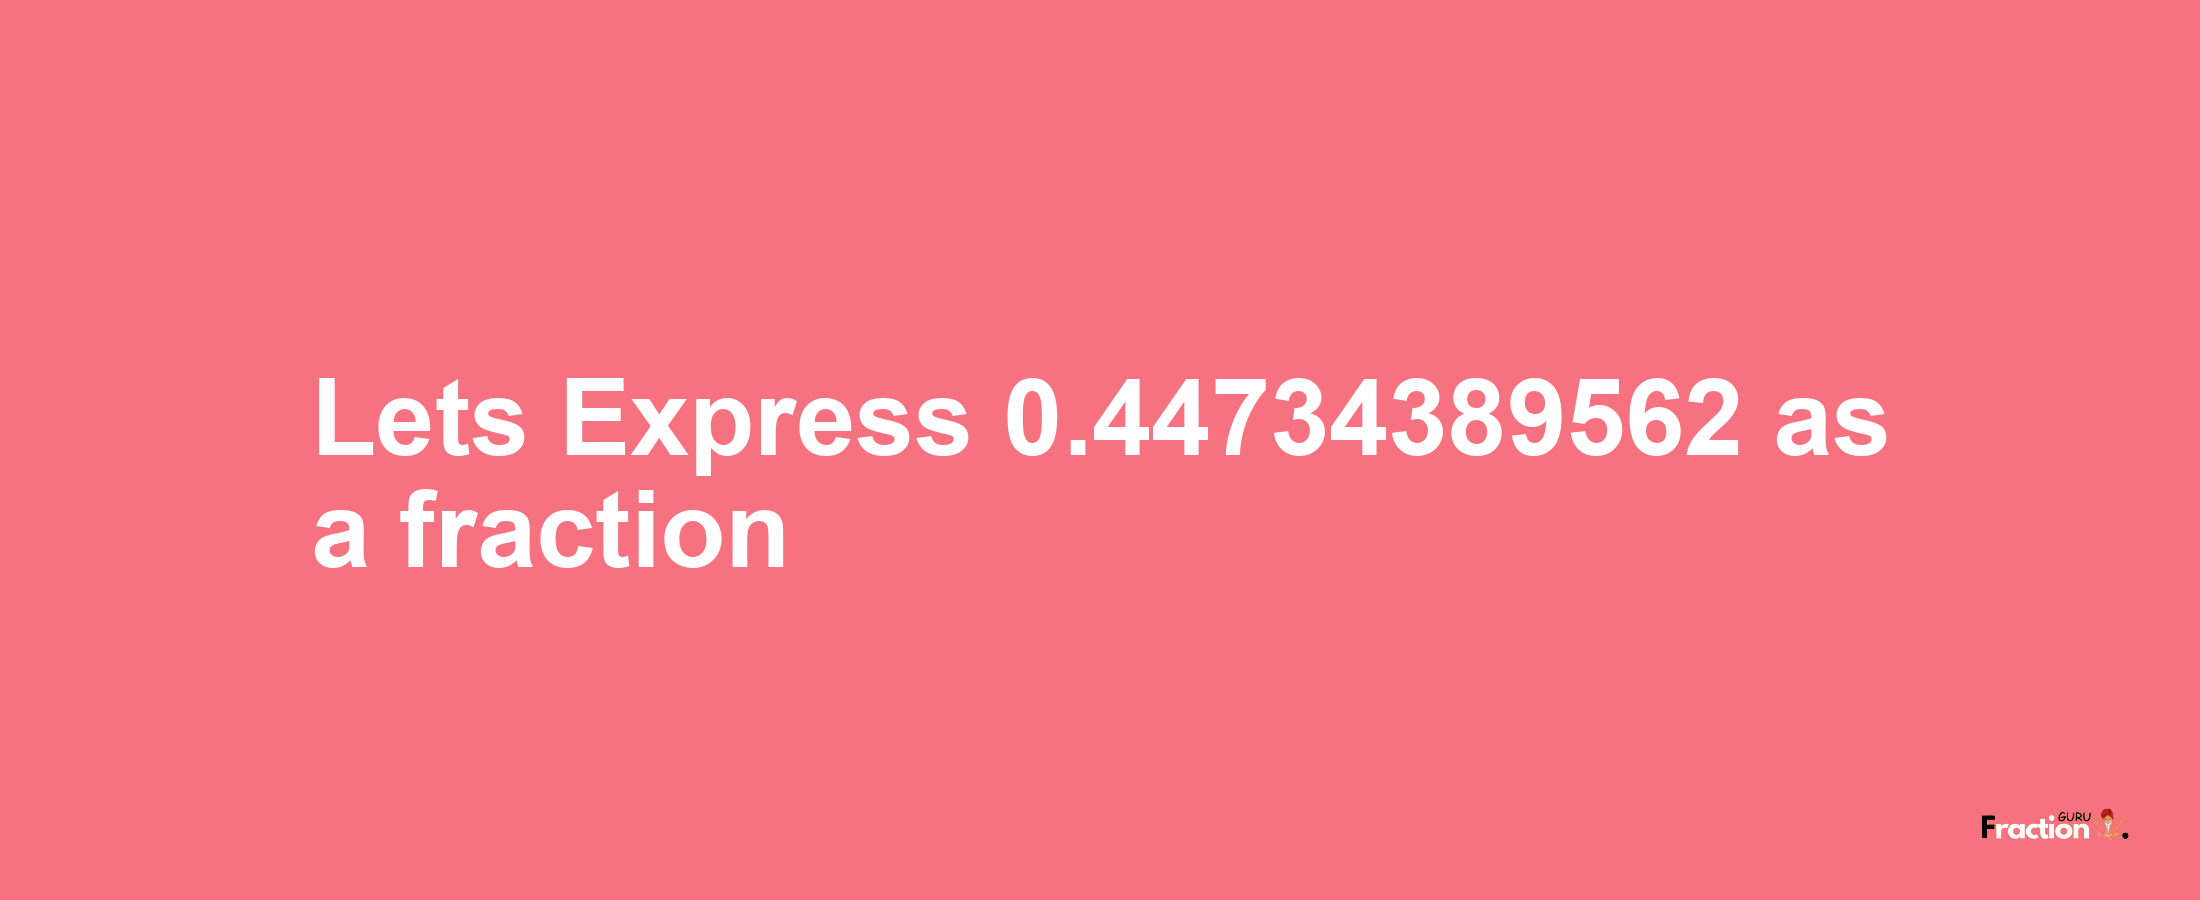 Lets Express 0.44734389562 as afraction